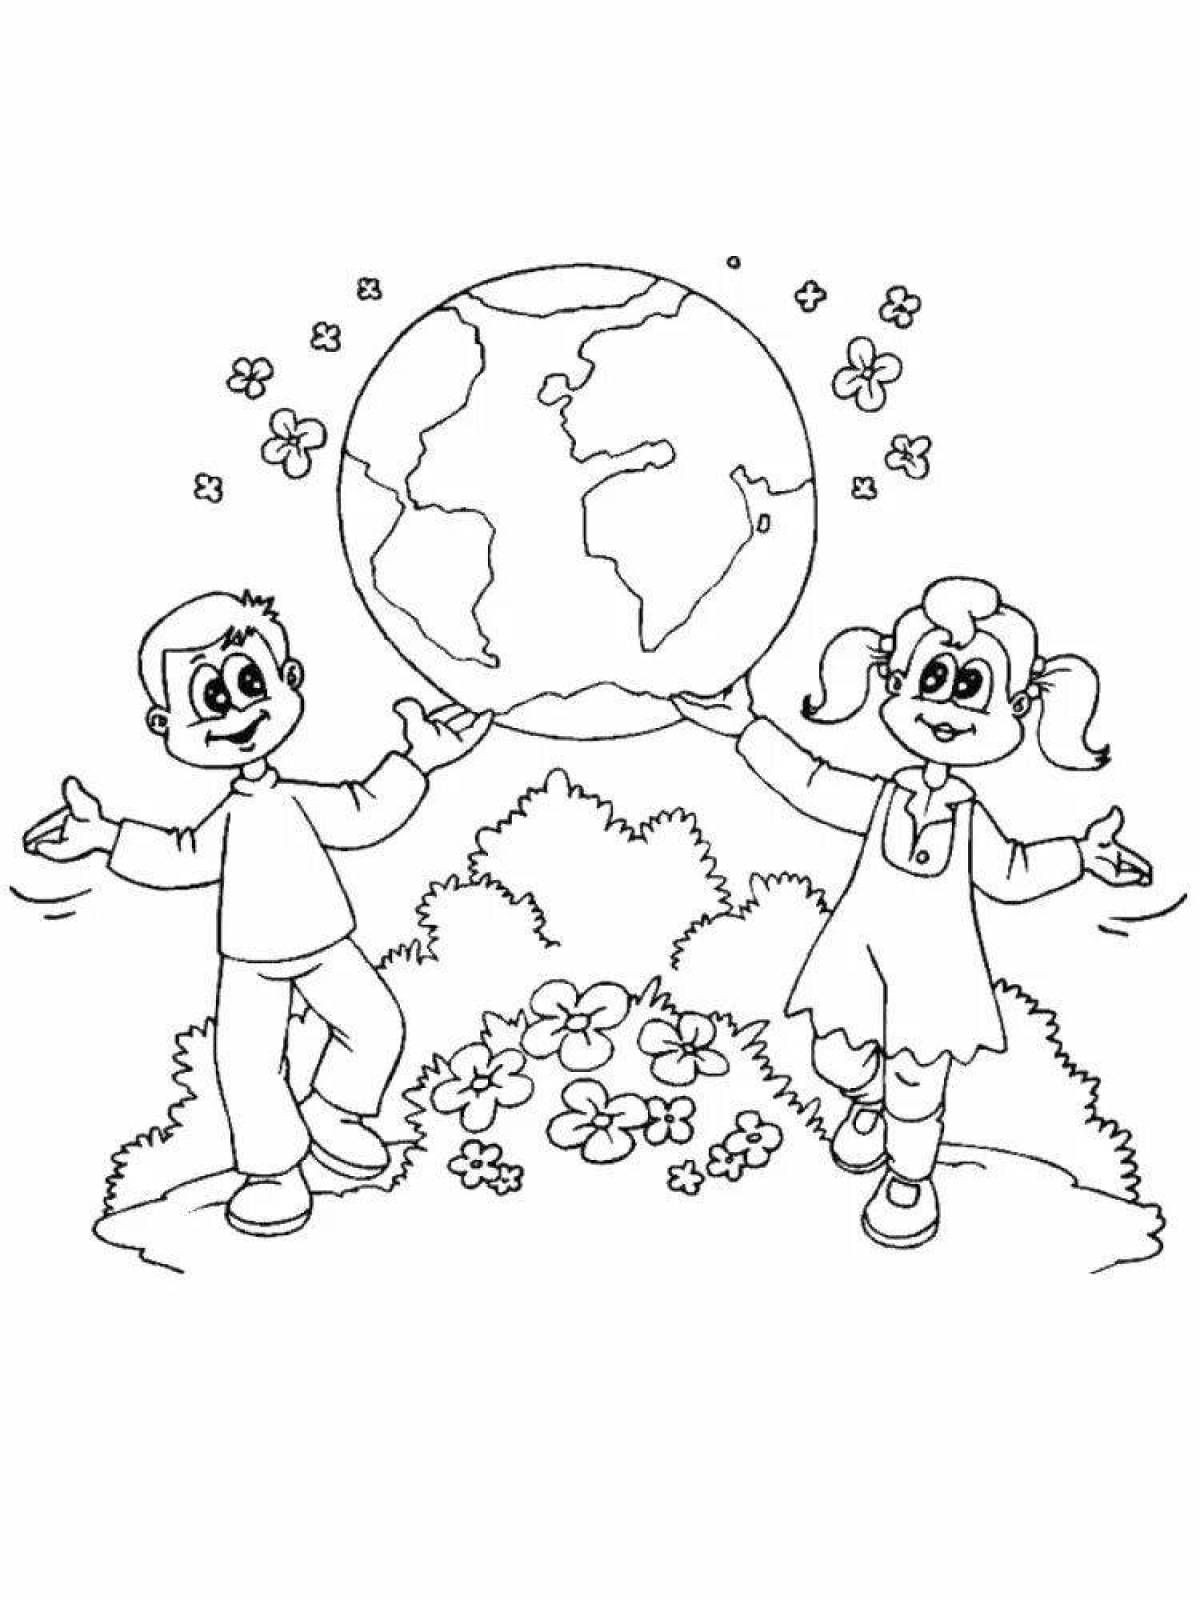 Blissful ecology coloring book